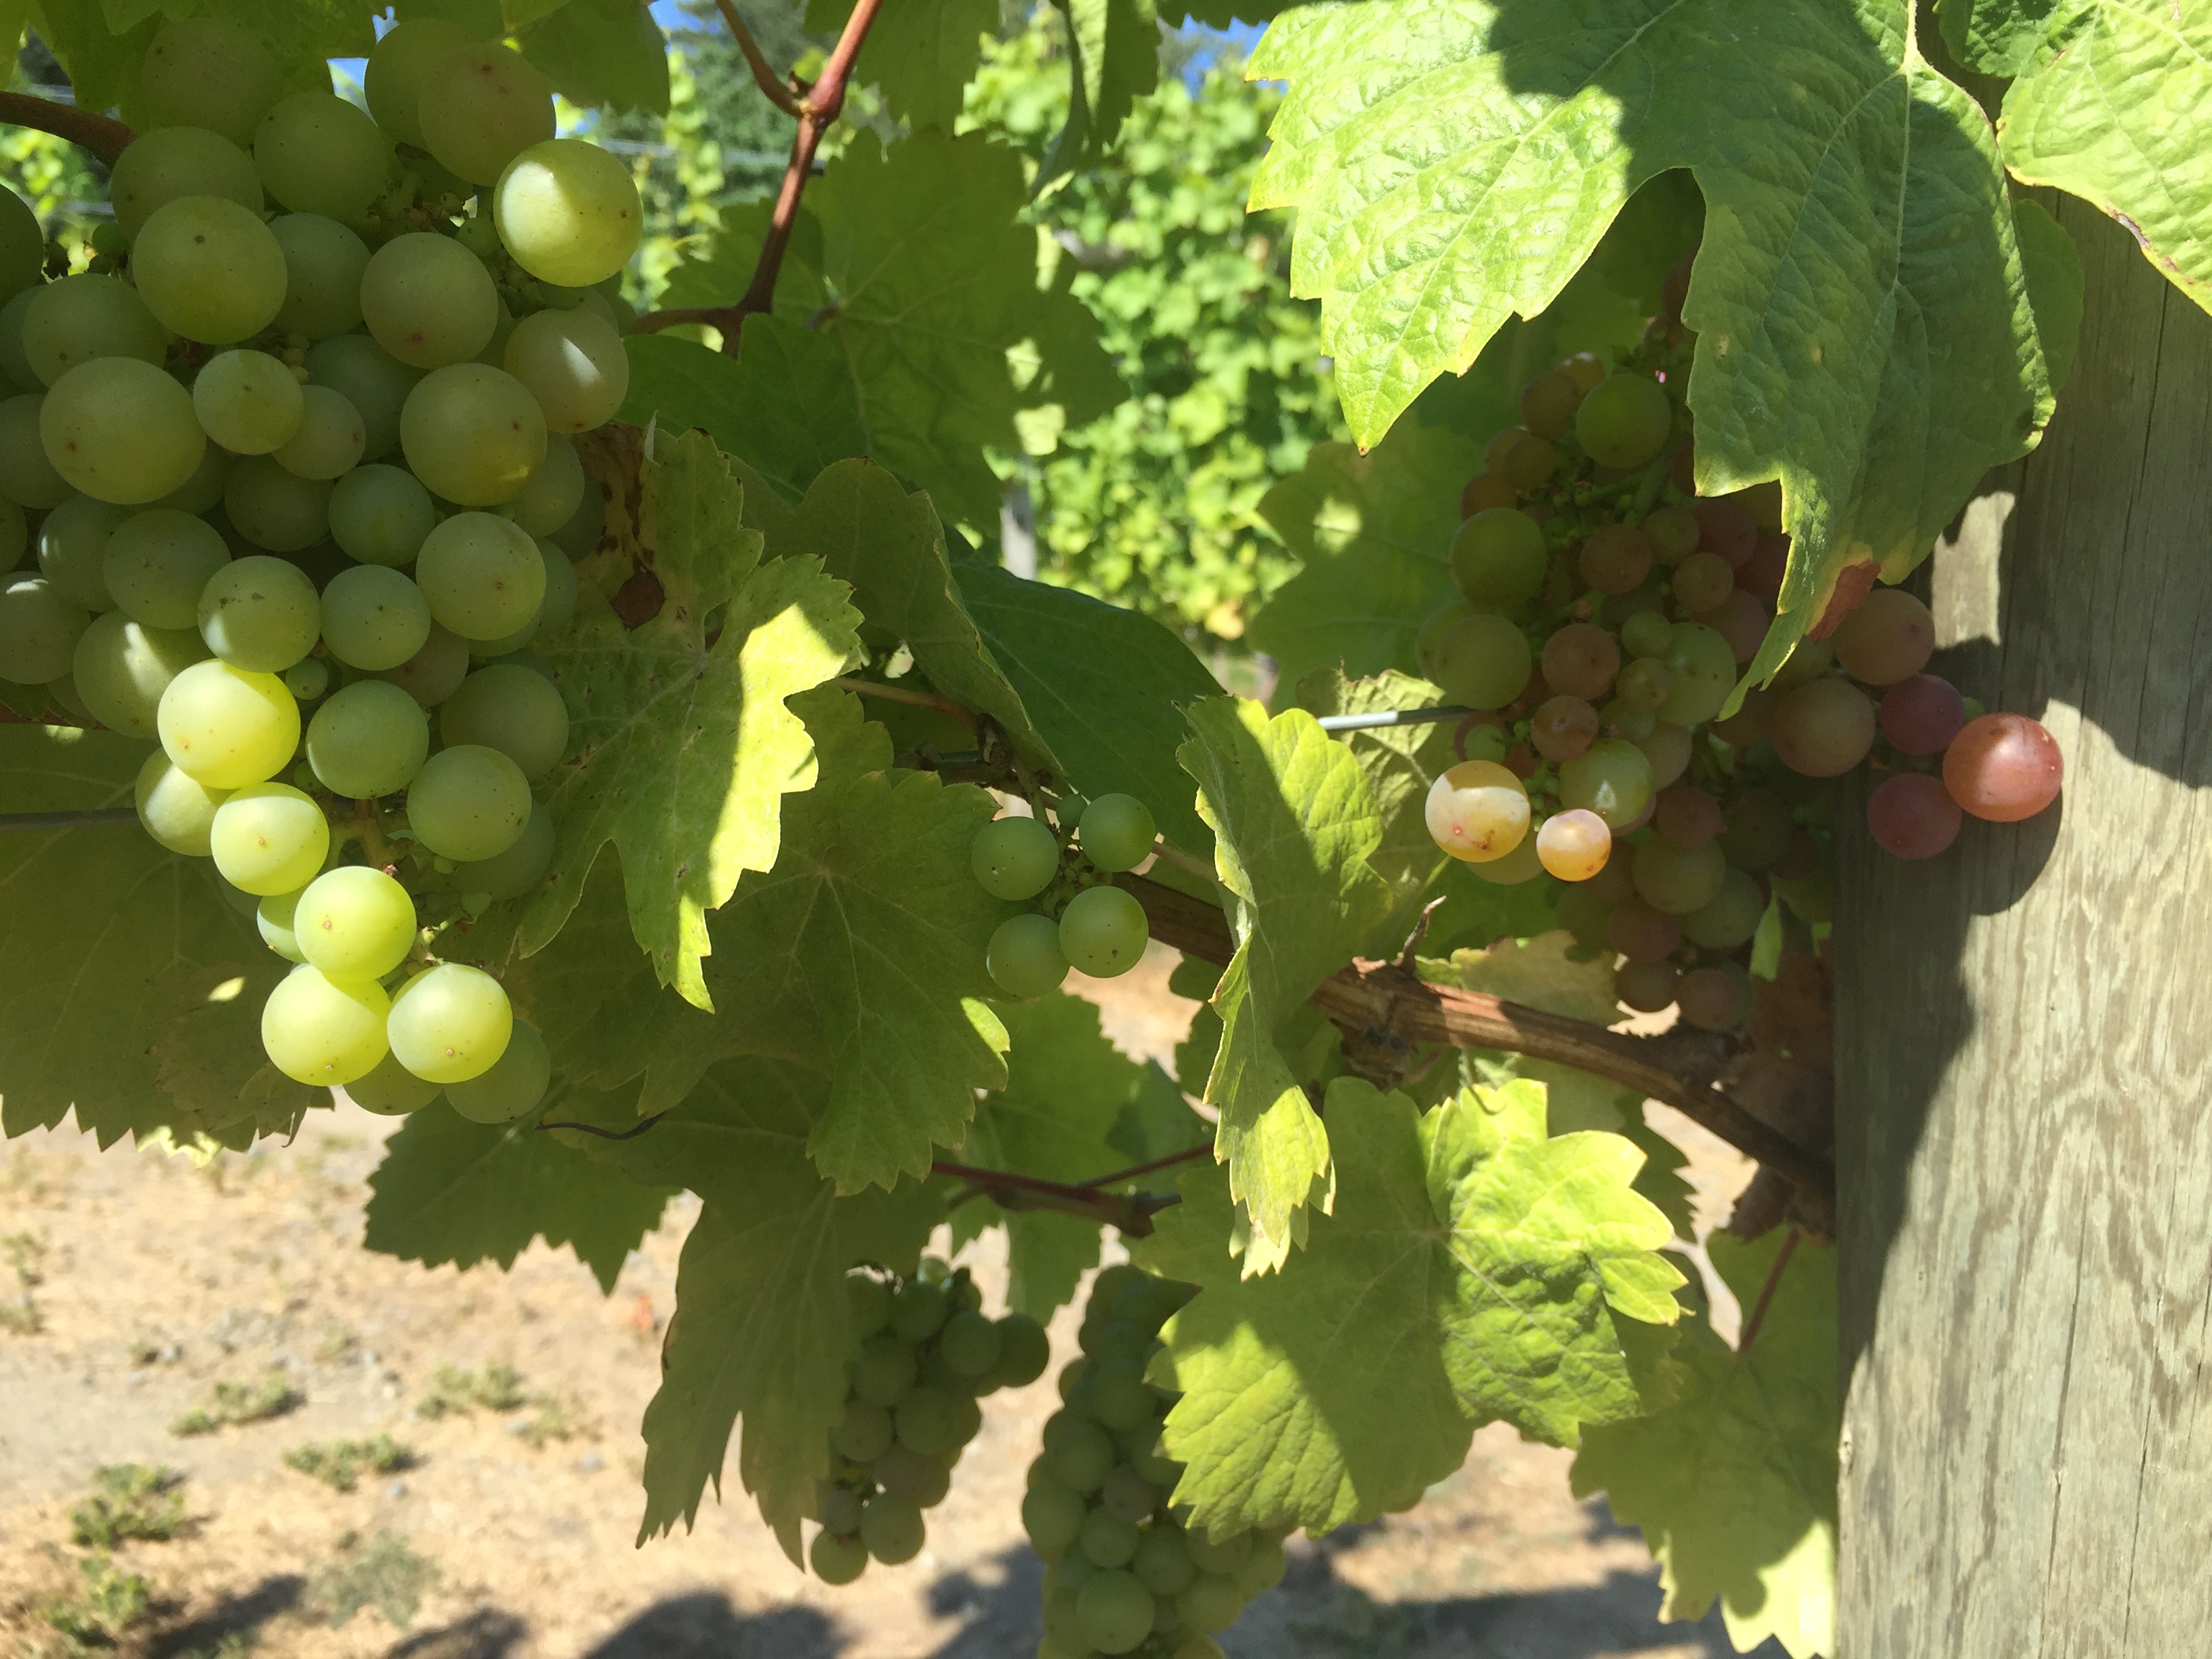 closeup image of more white wine grapes on the vine.